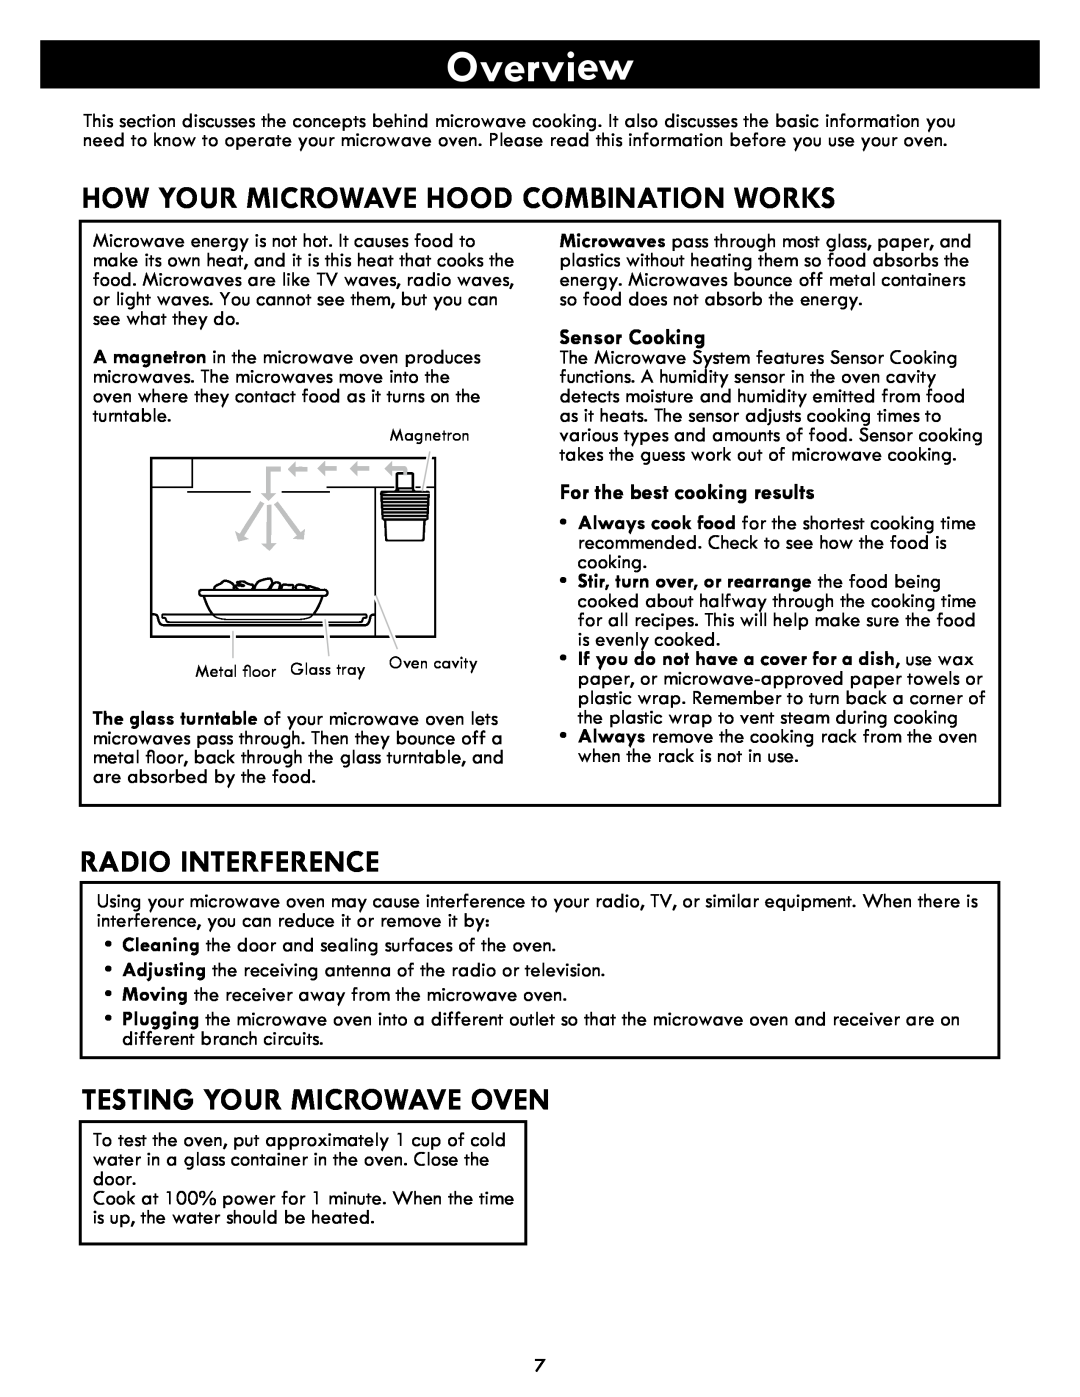 Kenmore 86019, 86013 Overview, How Your Microwave Hood Combination Works, Radio Interference, Testing Your Microwave Oven 